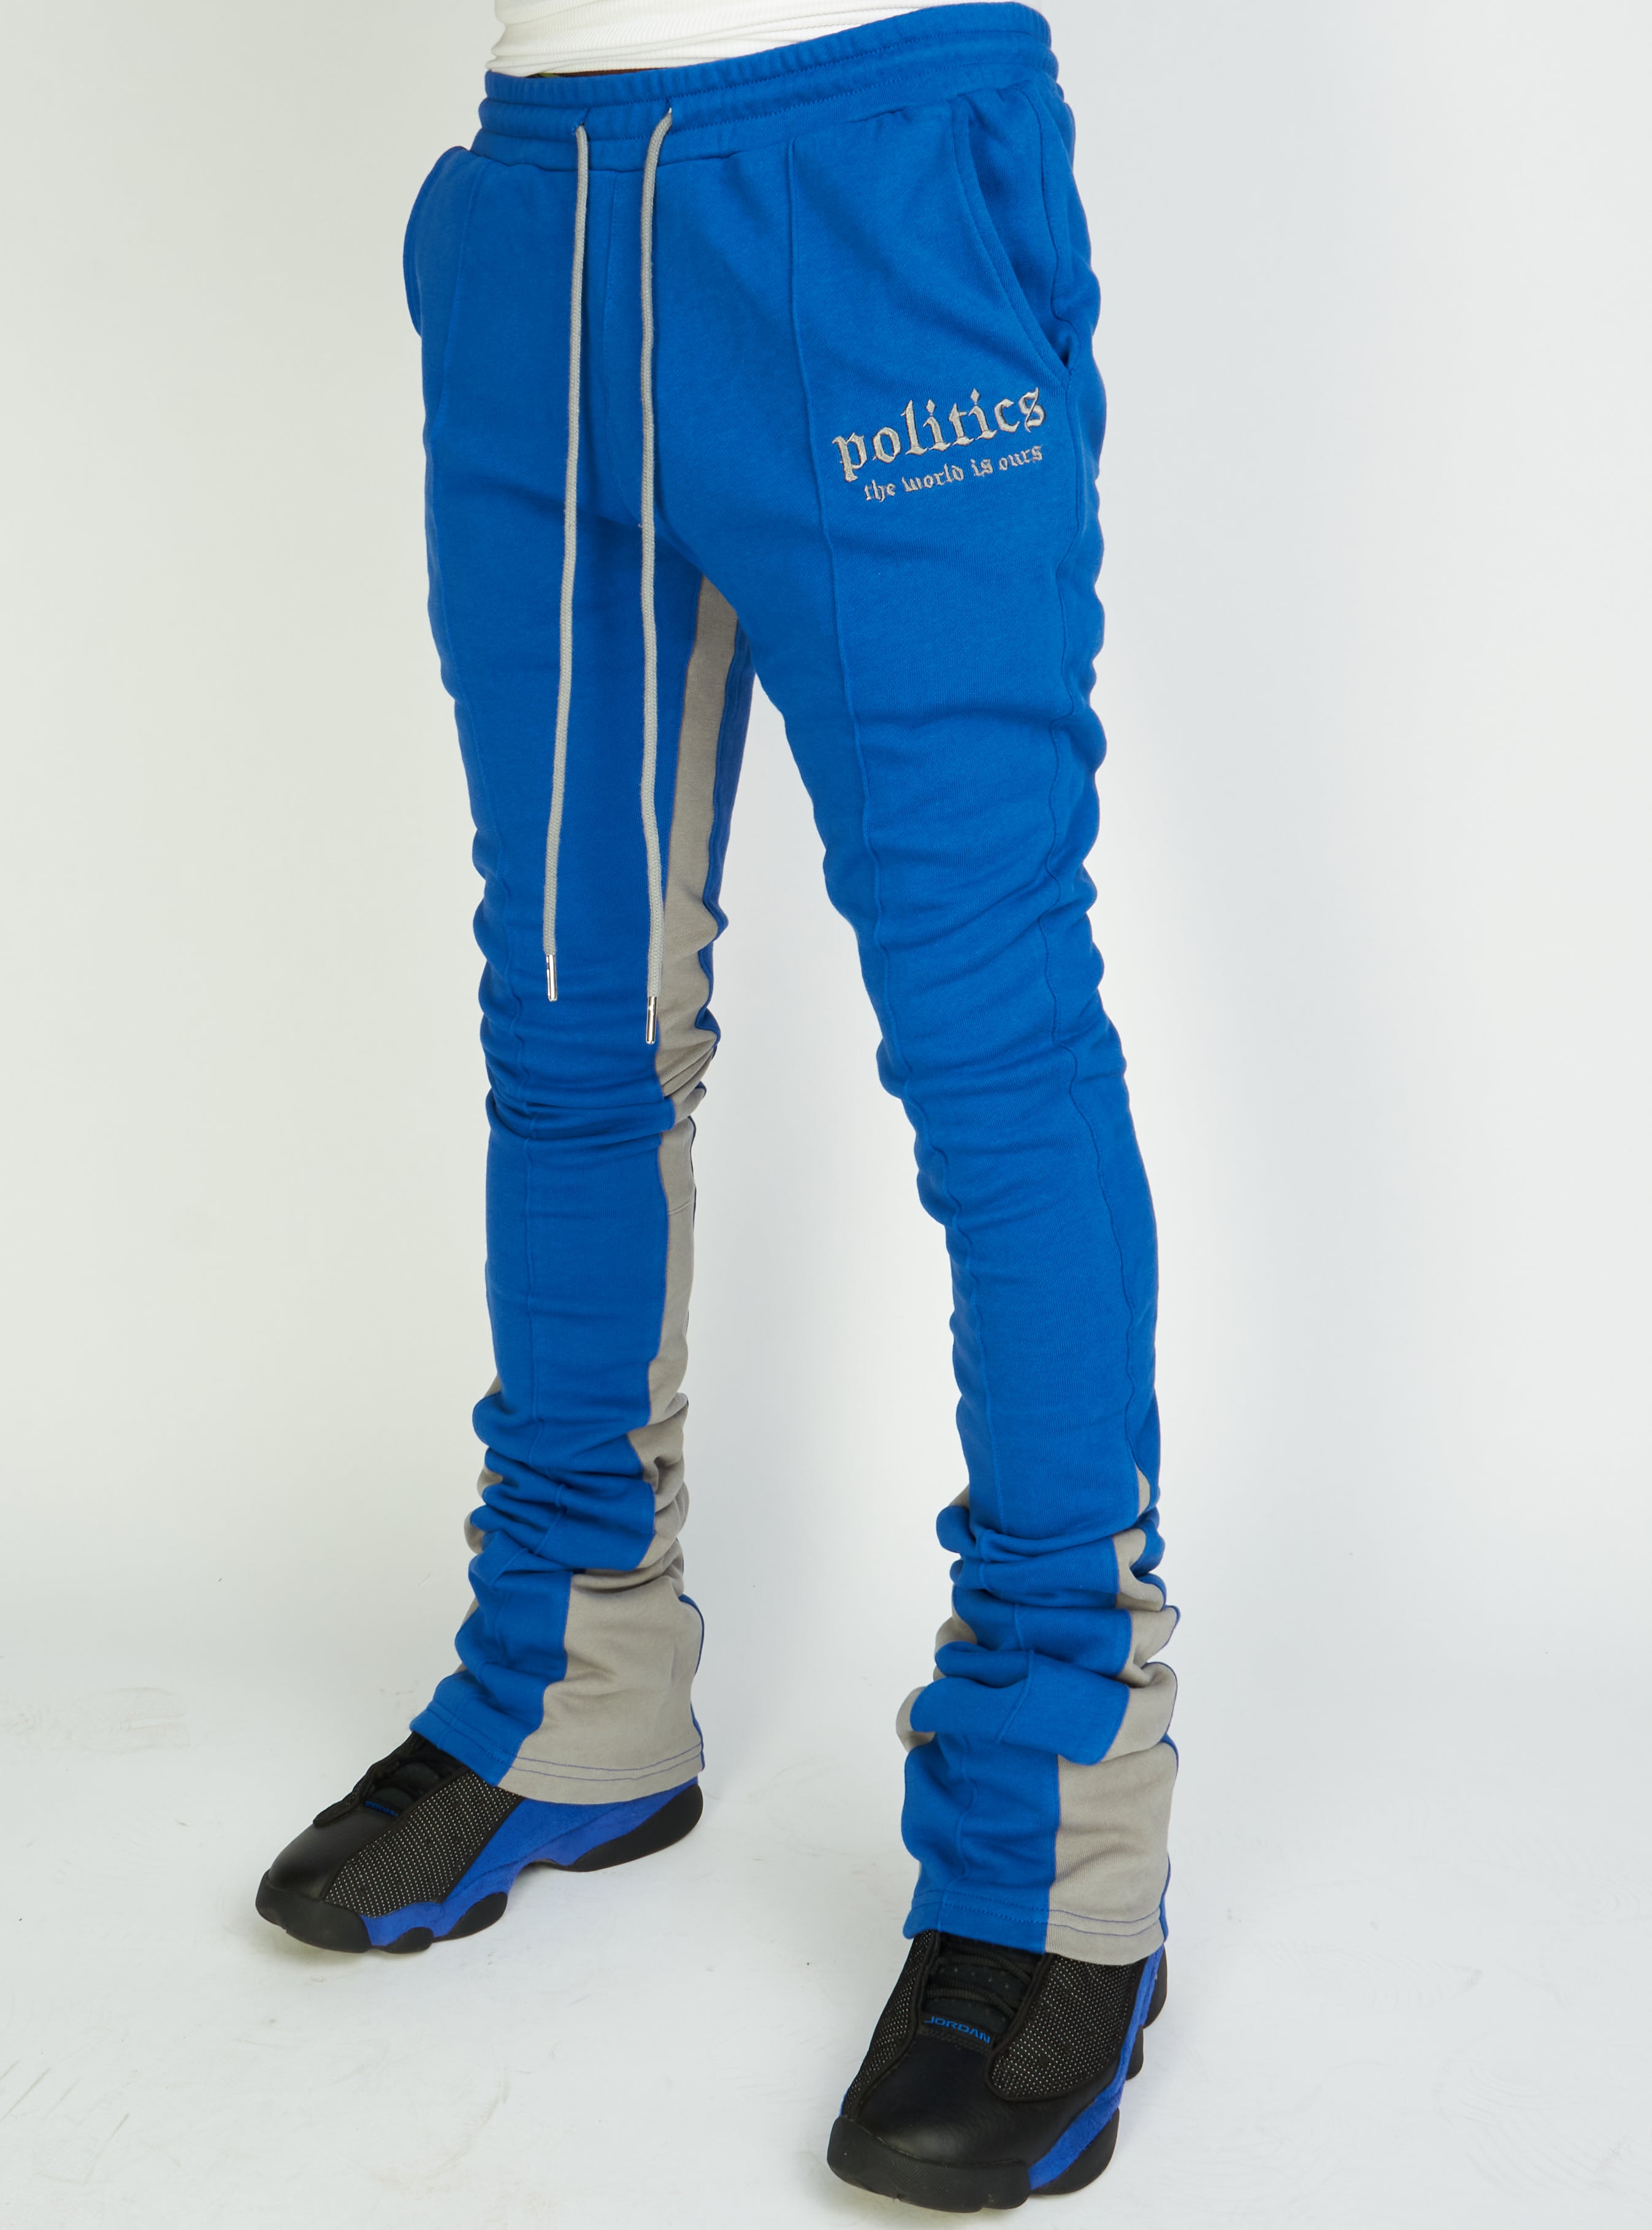 Politics Super Stacked Sweatpants - Blue And Grey - Foster705 – Vengeance78